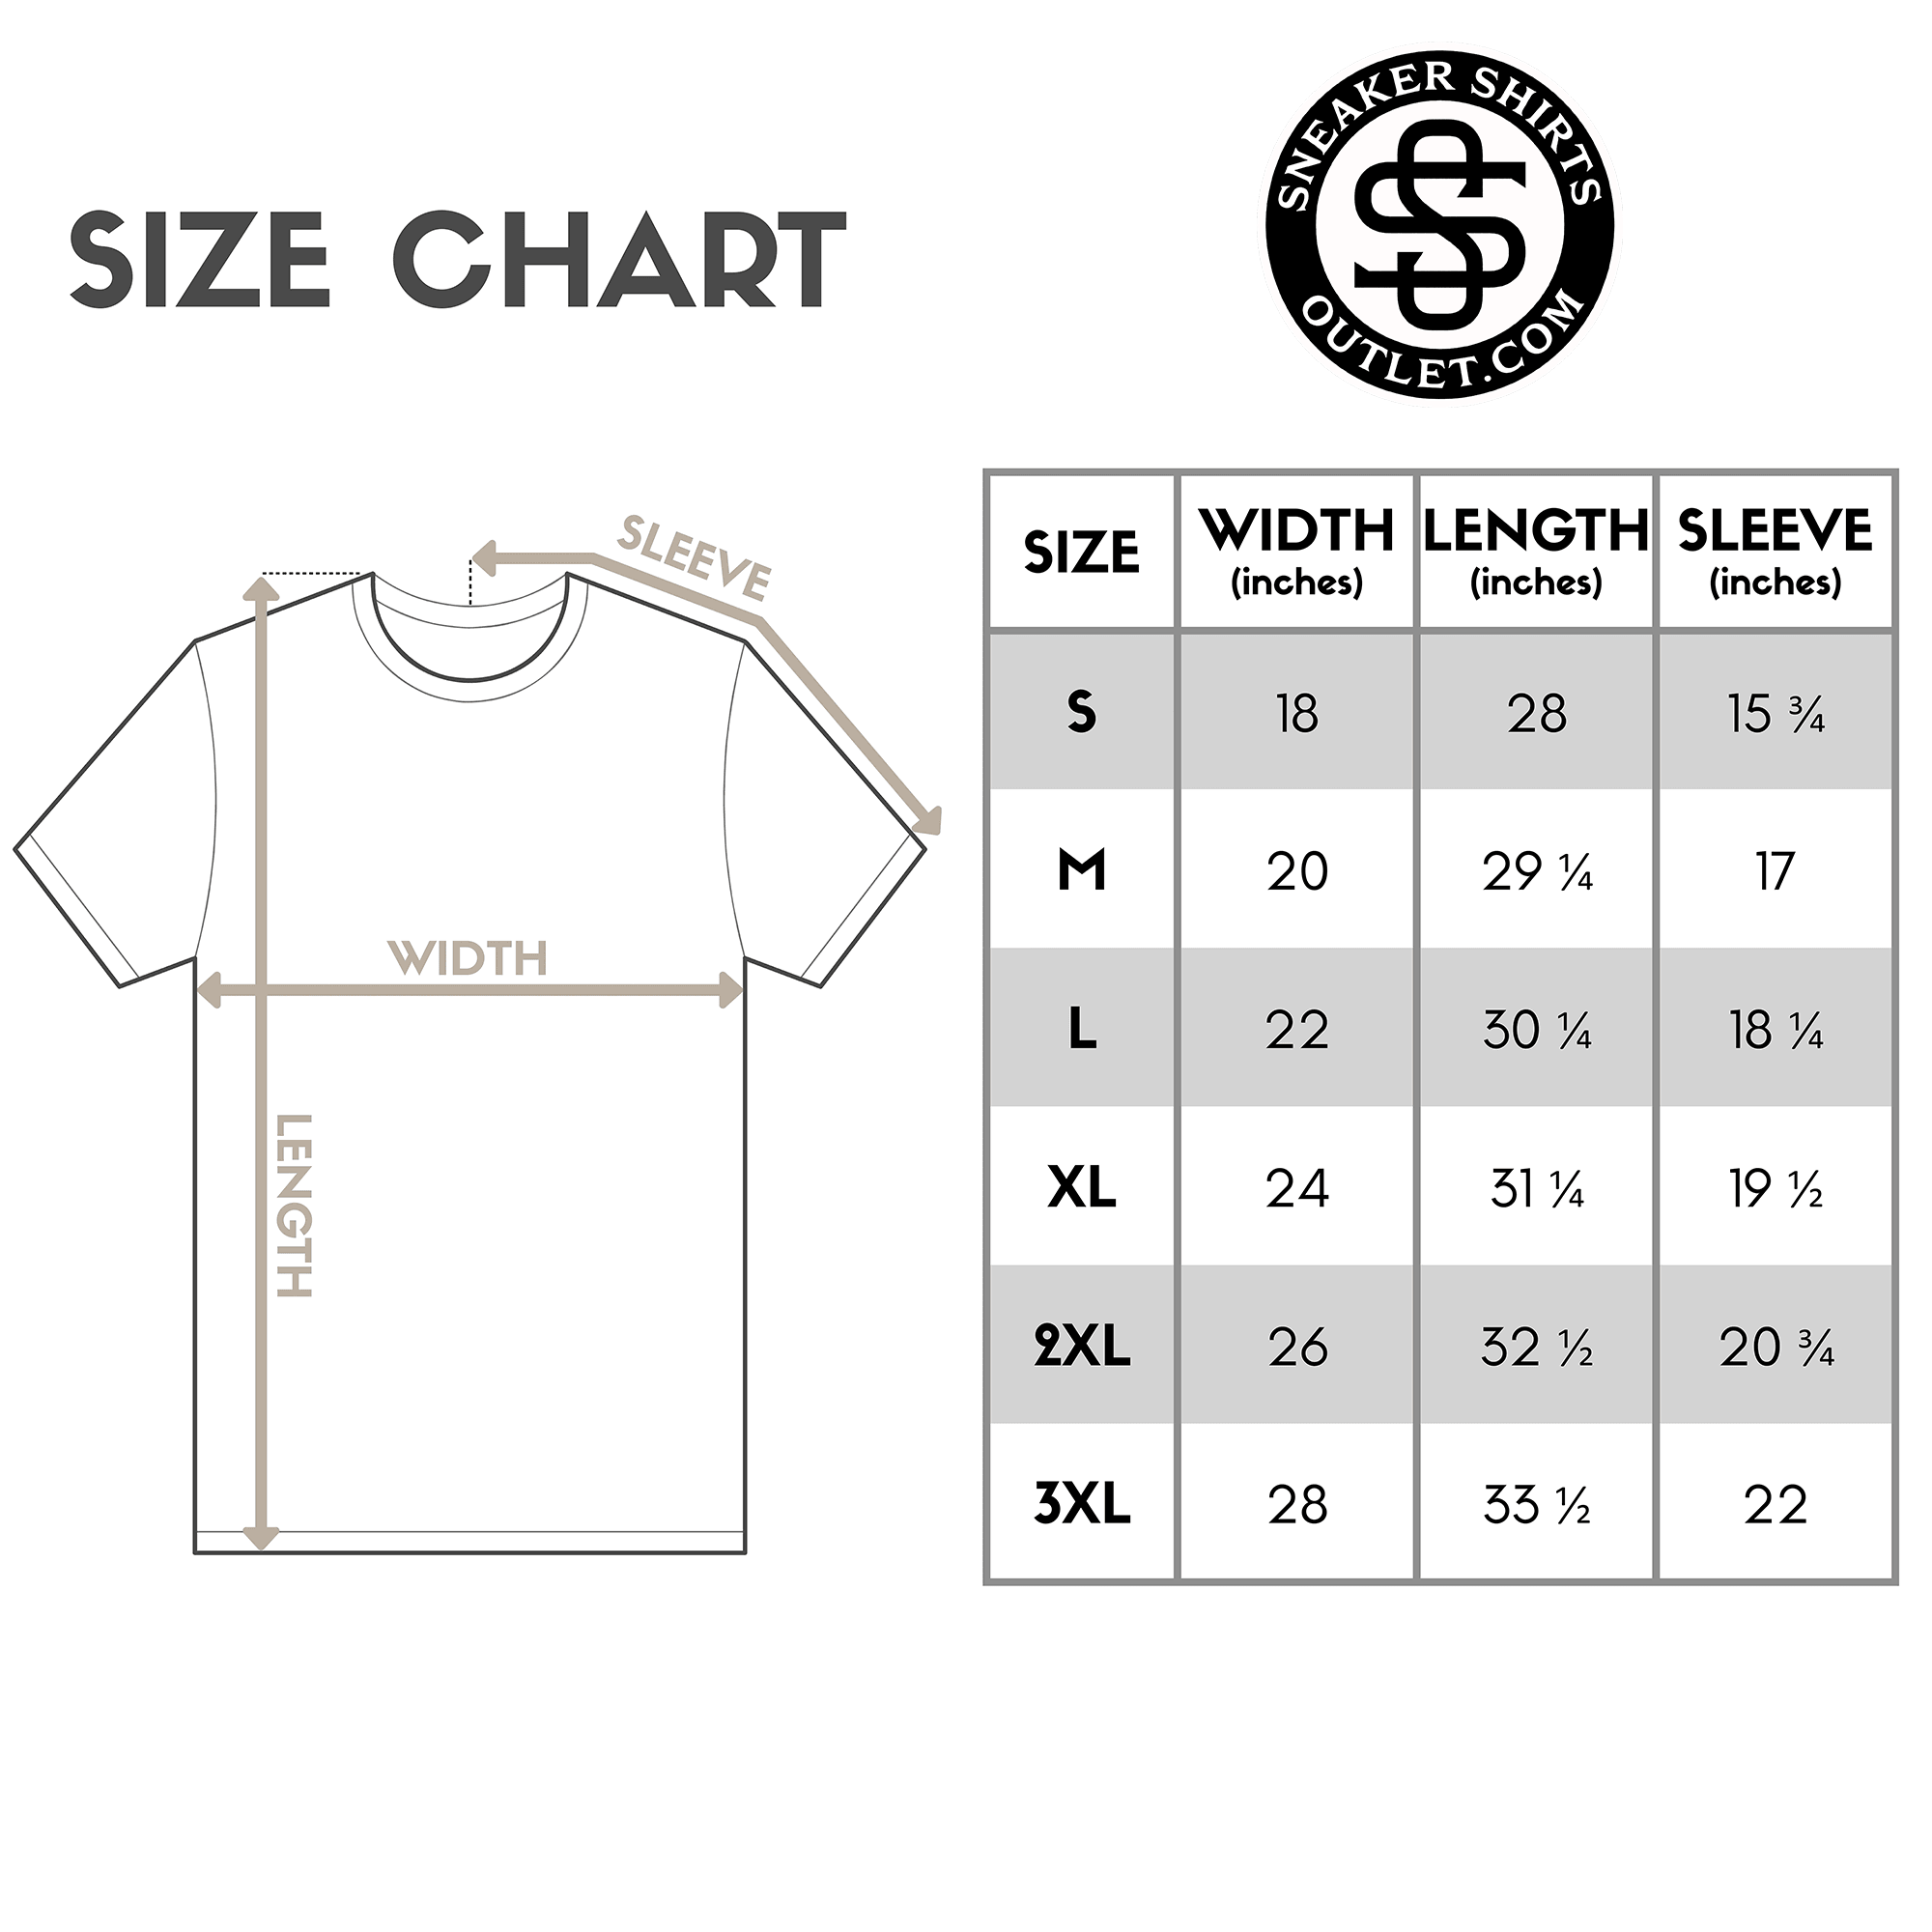 Adidas Yeezy Boost 350 V2 Slate - Level Up - Sneaker Shirts Outlet